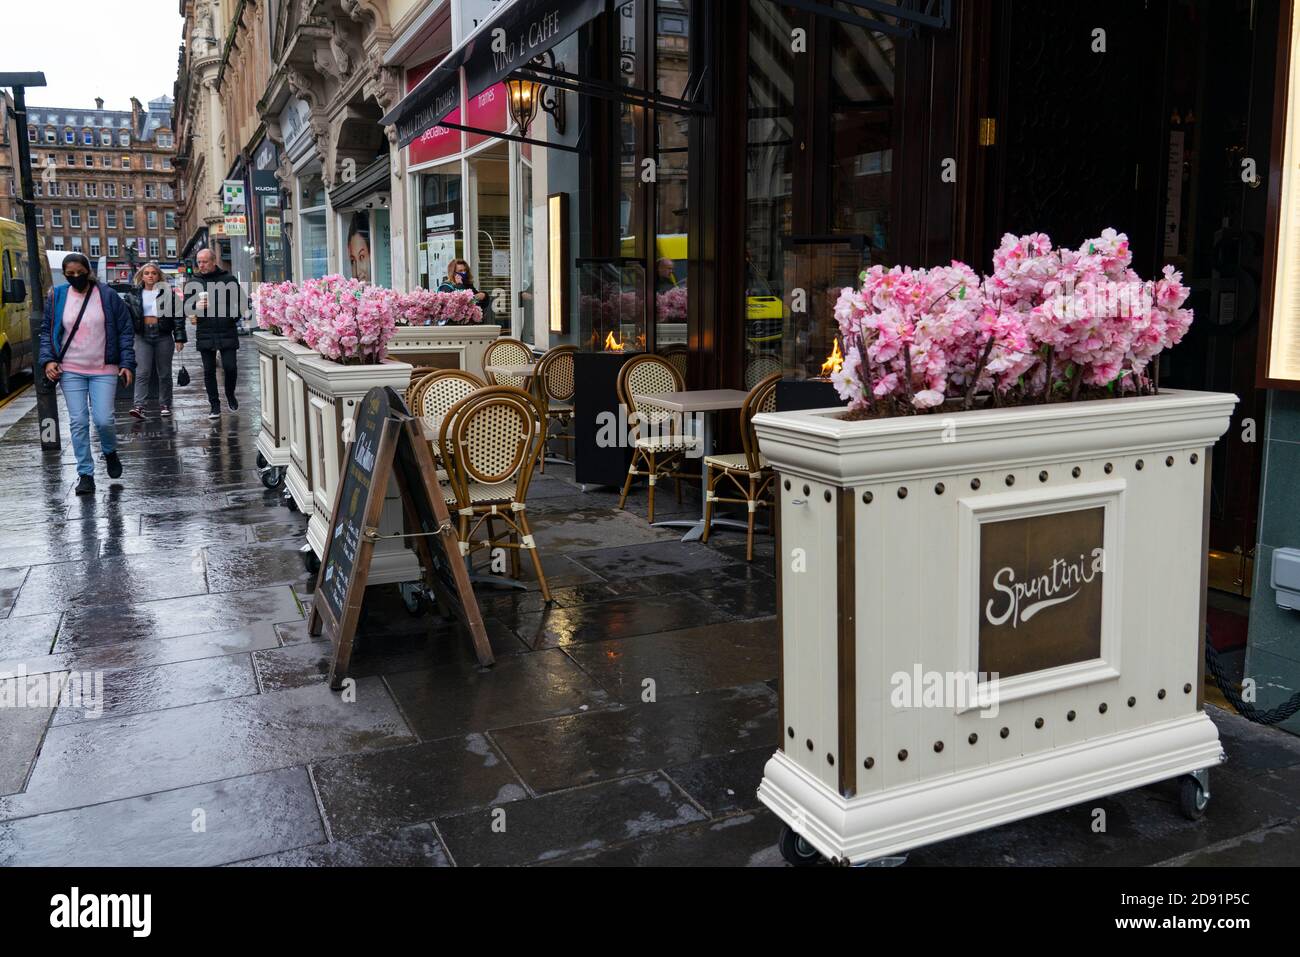 Glasgow,Scotland, UK. 2 November 2020. As Scotland enters new Coronavirus lockdown regulations the central belt and Glasgow are placed in Level 3 . Members of the public are seen out on the streets of central Glasgow for shopping and work. Pictured; Empty outdoor seating area decorated with flowers at Spuntini cafe.   Iain Masterton/Alamy Live News Stock Photo